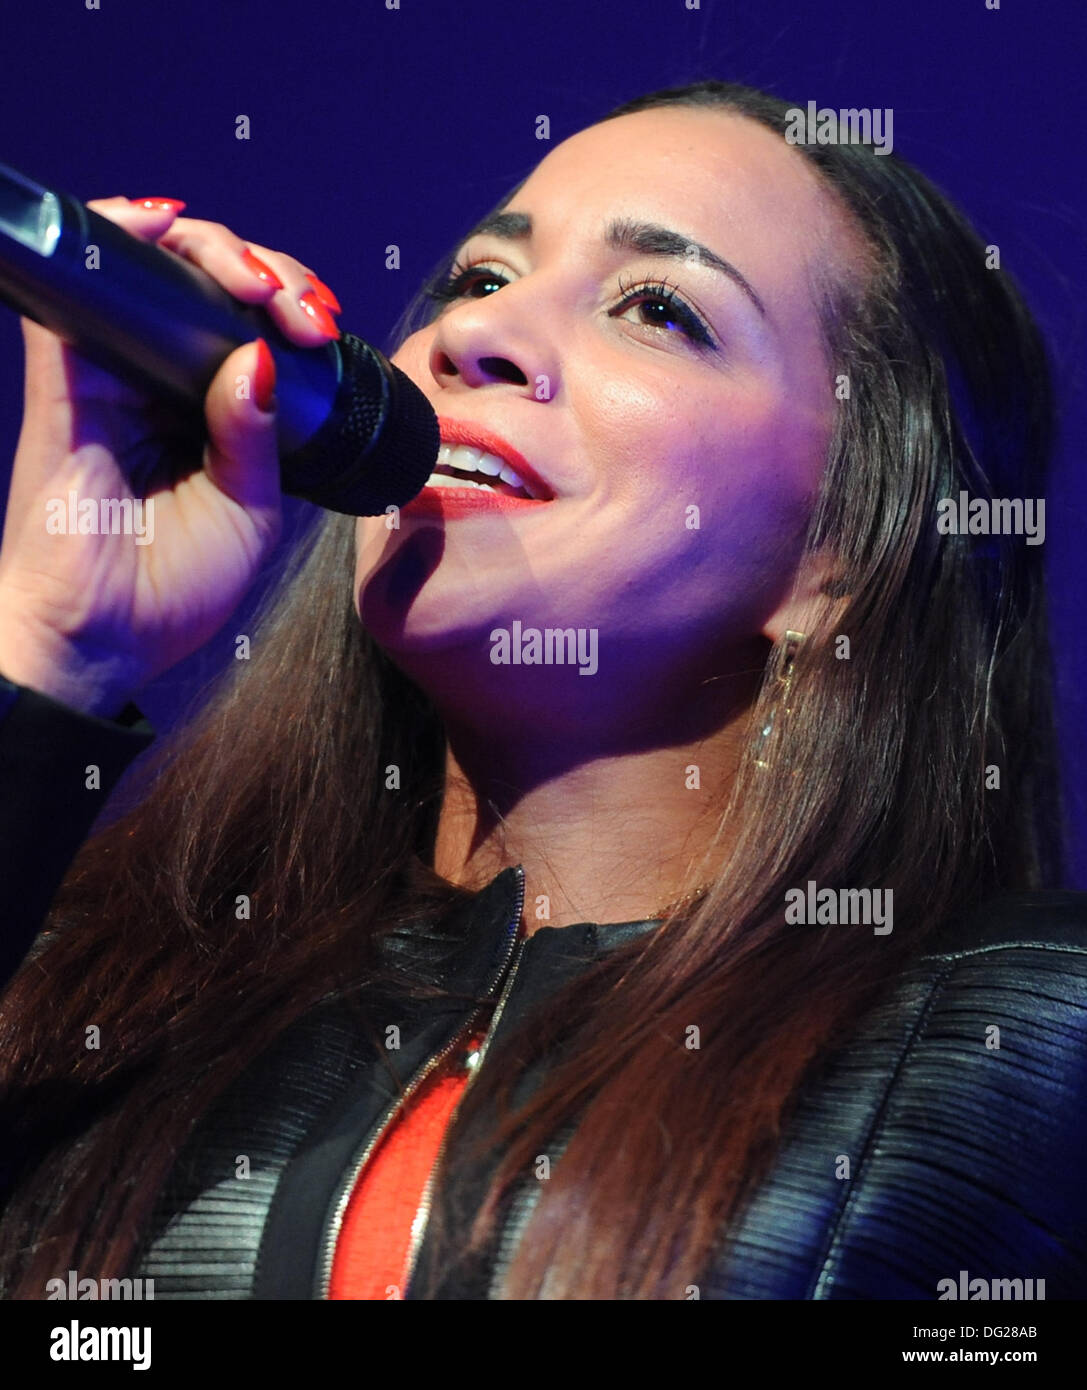 Berlin, Germany. 11th Oct, 2013. Singer Nadja Benaissa performes during the celebration of the thirty year anniversary of the German AIDS Service Organization in Berlin, Germany, 11 October 2013. Photo: BRITTA PEDERSEN/dpa/Alamy Live News Stock Photo